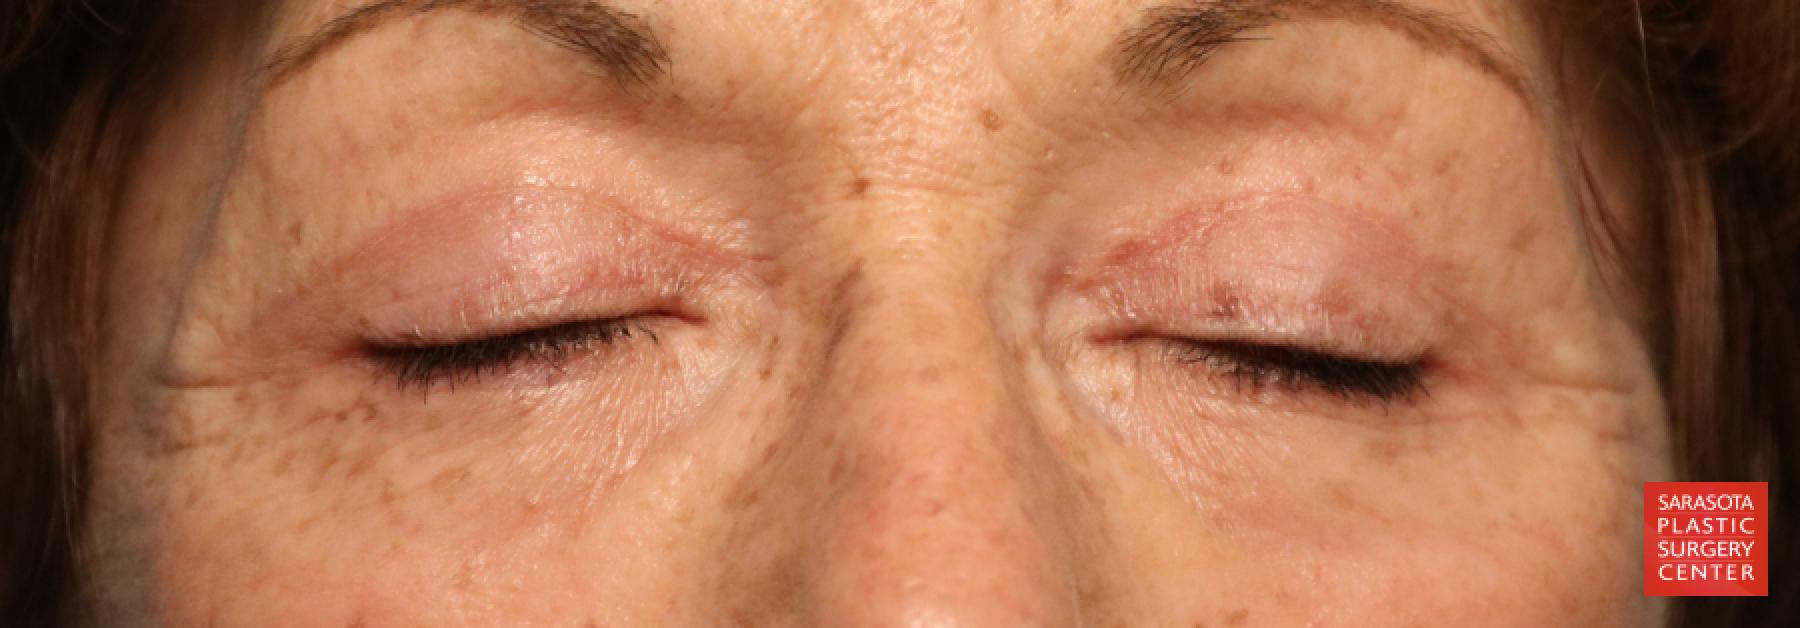 Eyelid Lift: Patient 7 - After 3